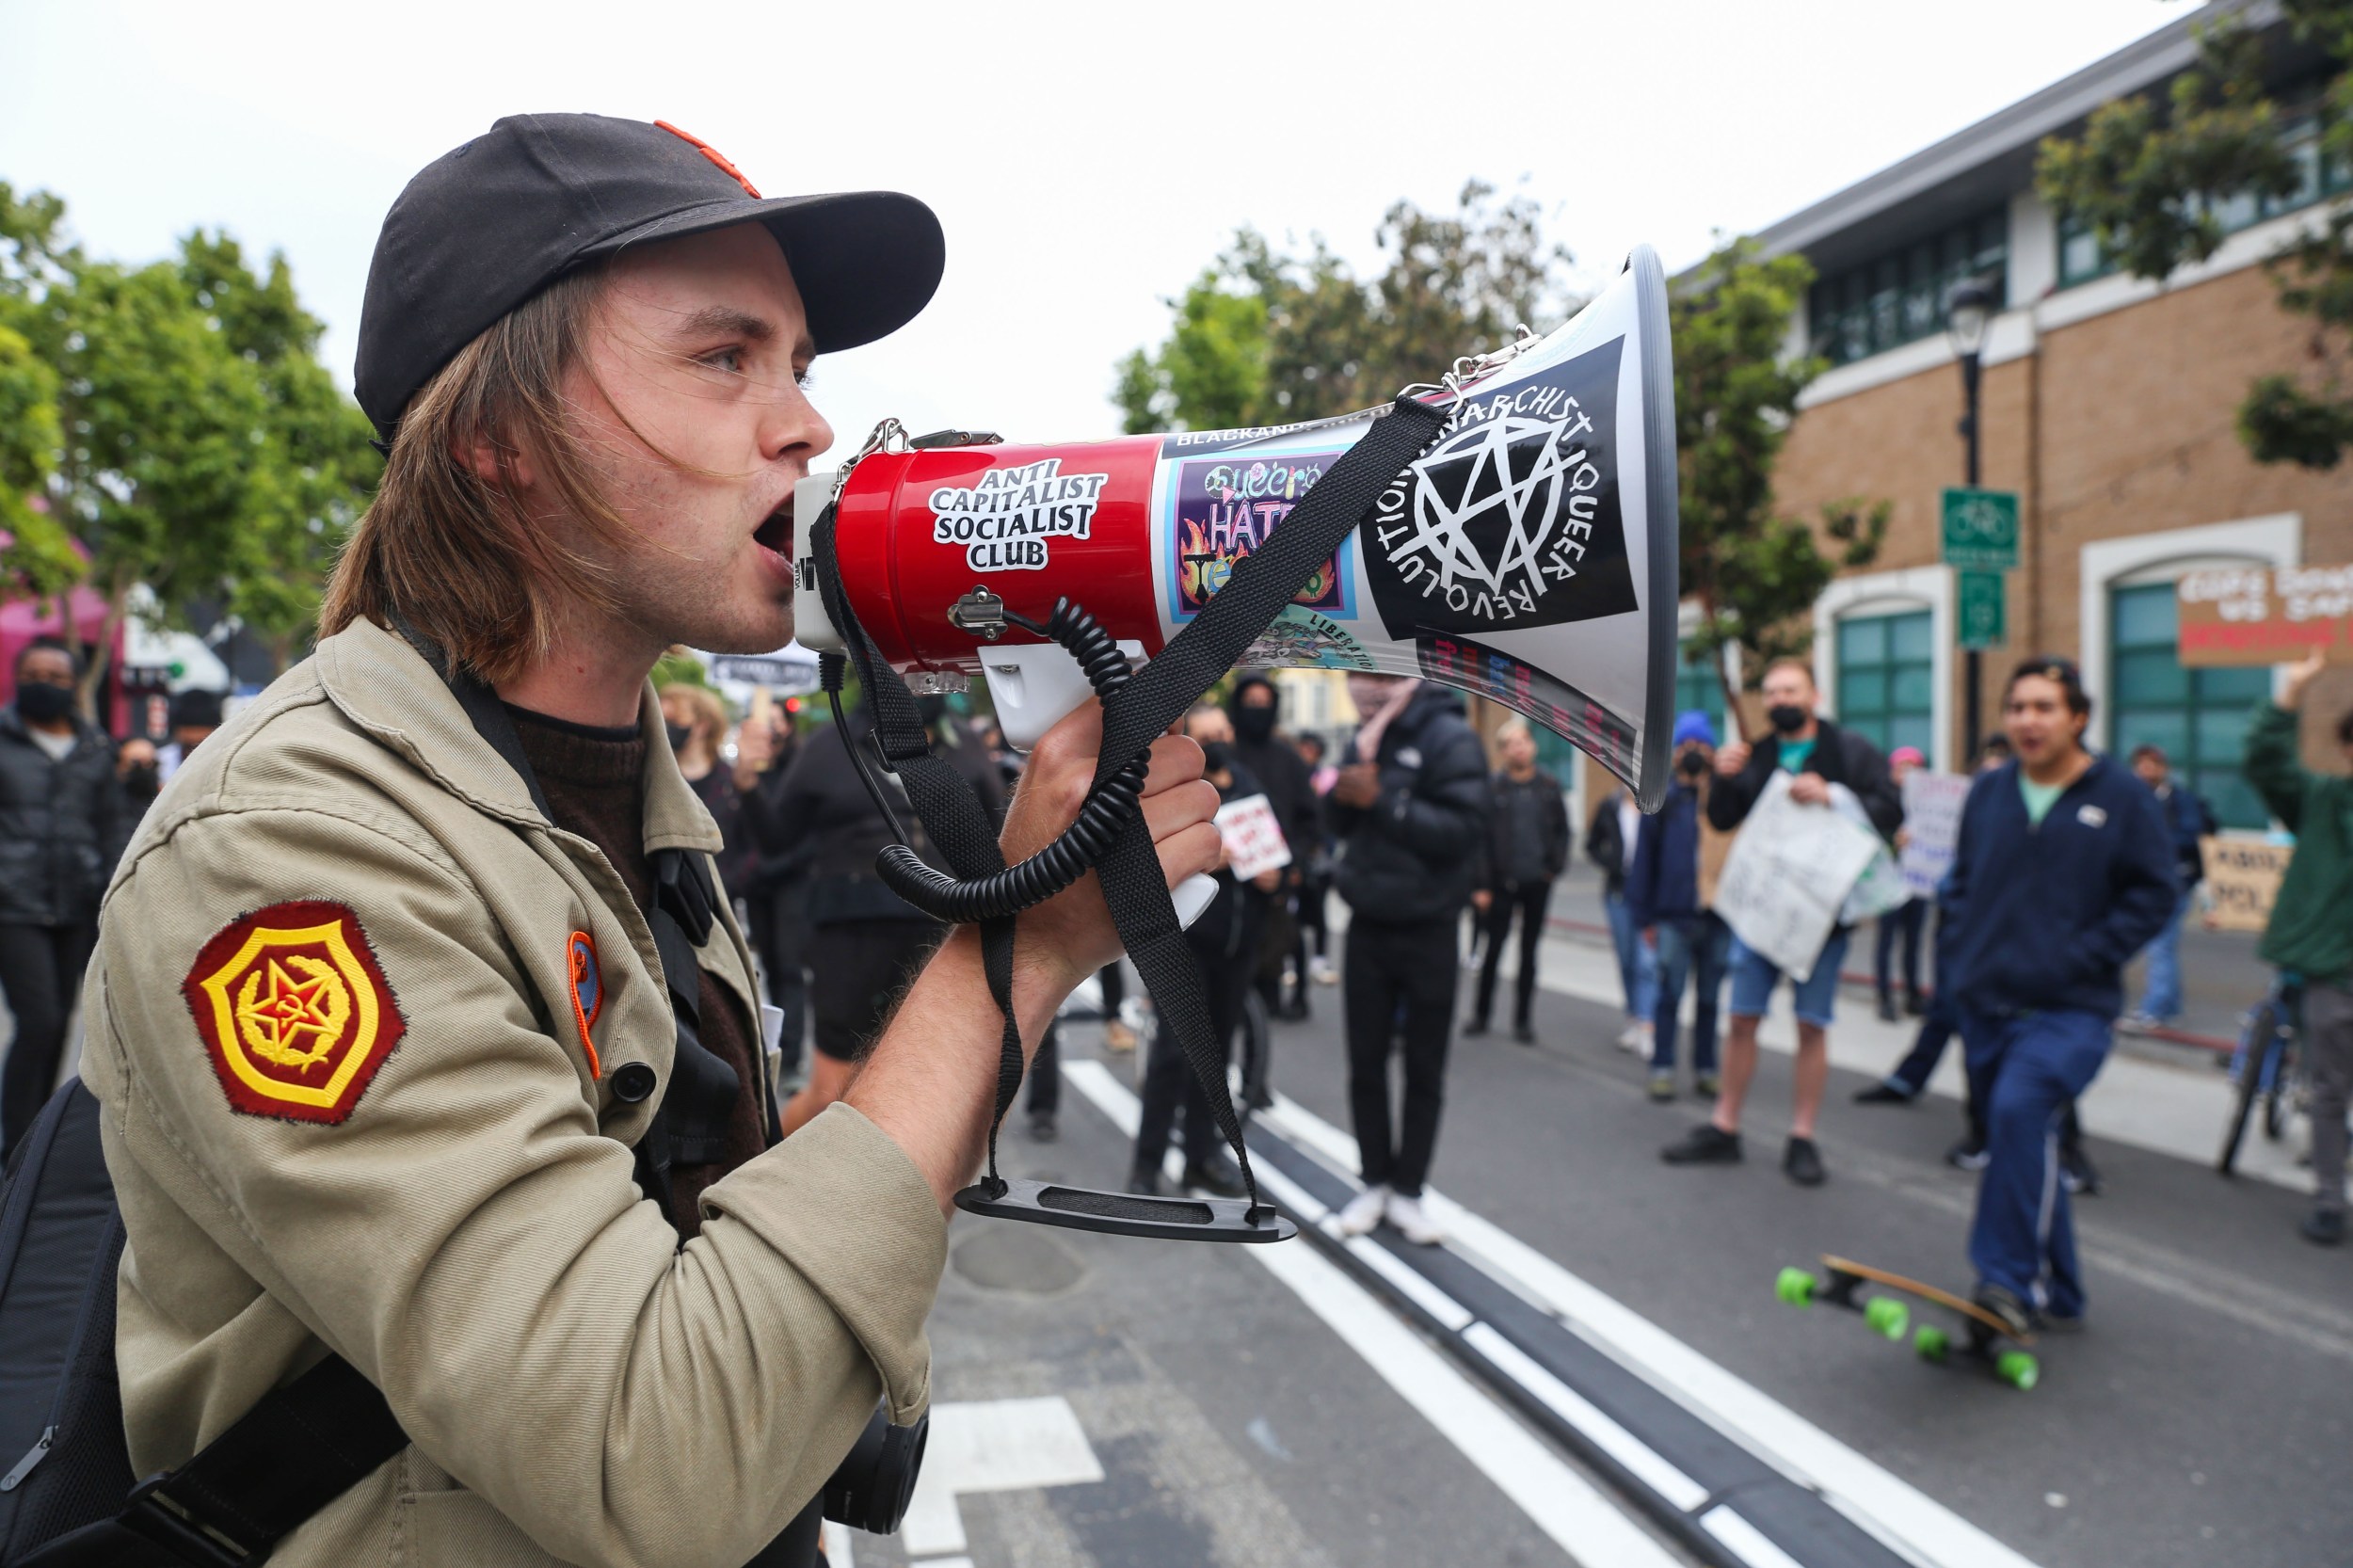 A man with a bullhorn yells during a protest in San Francisco.